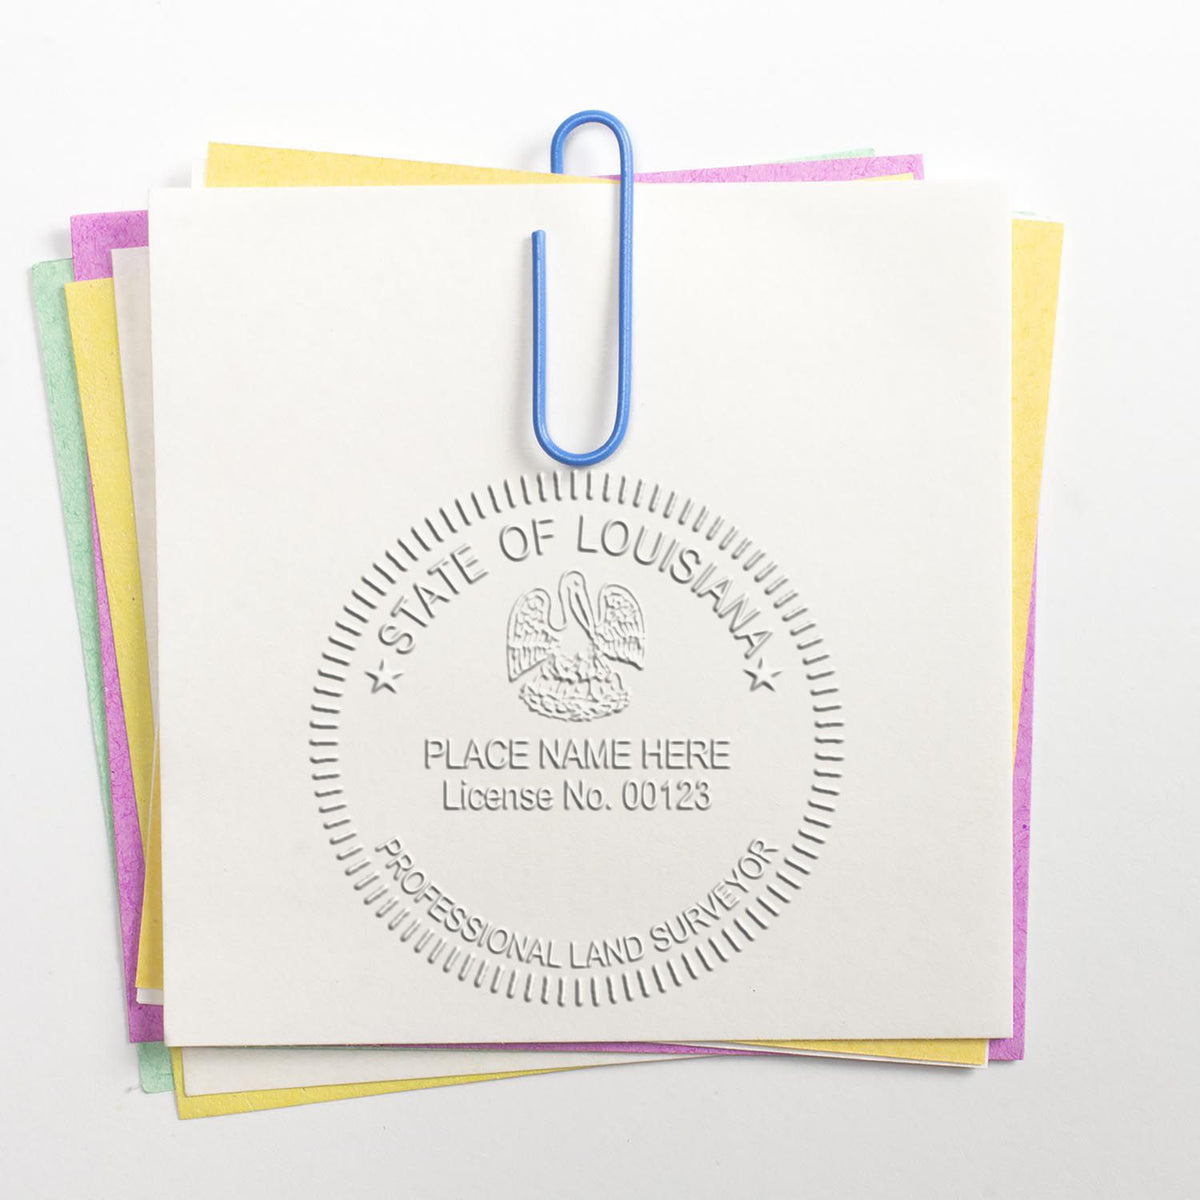 An in use photo of the Gift Louisiana Land Surveyor Seal showing a sample imprint on a cardstock